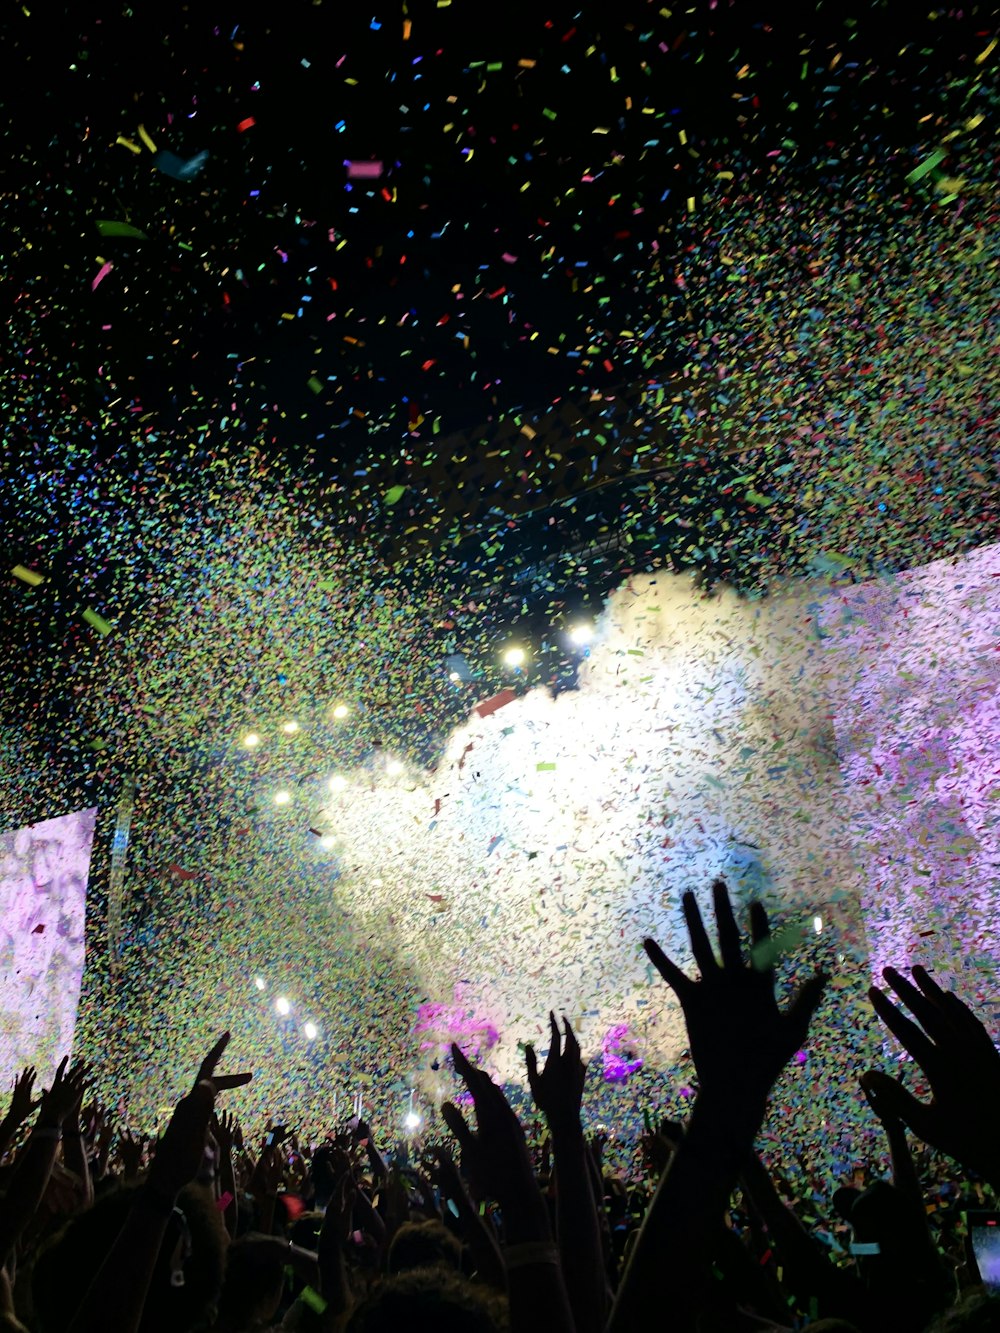 a crowd of people at a concert with confetti in the air